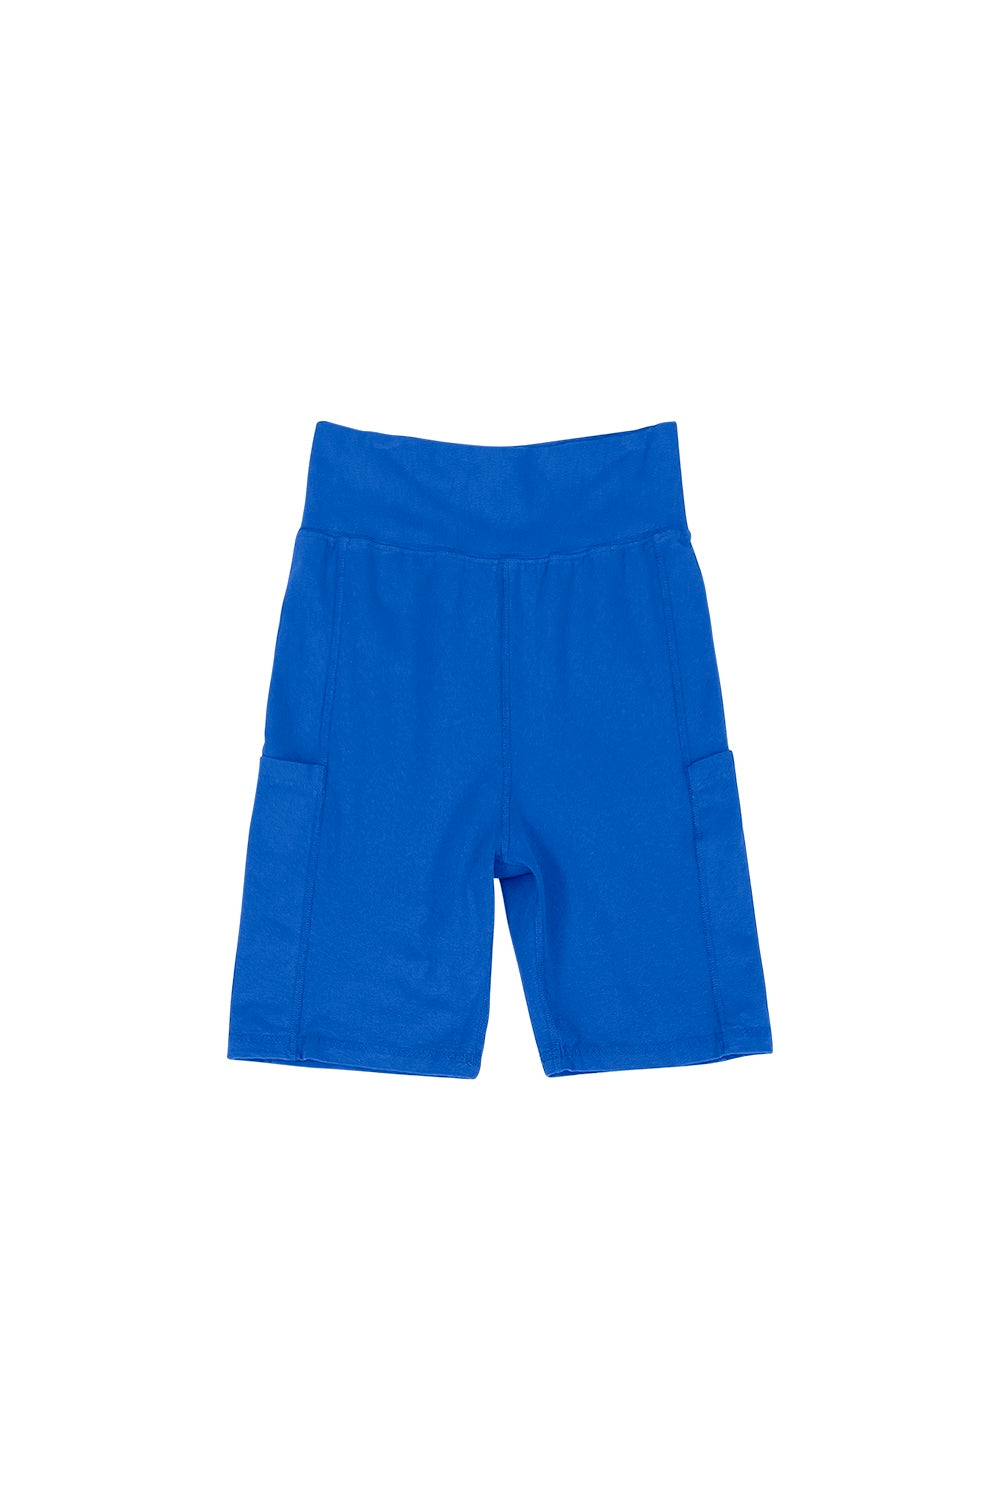 Bike Short with Pockets | Jungmaven Hemp Clothing & Accessories / Color: Galaxy Blue